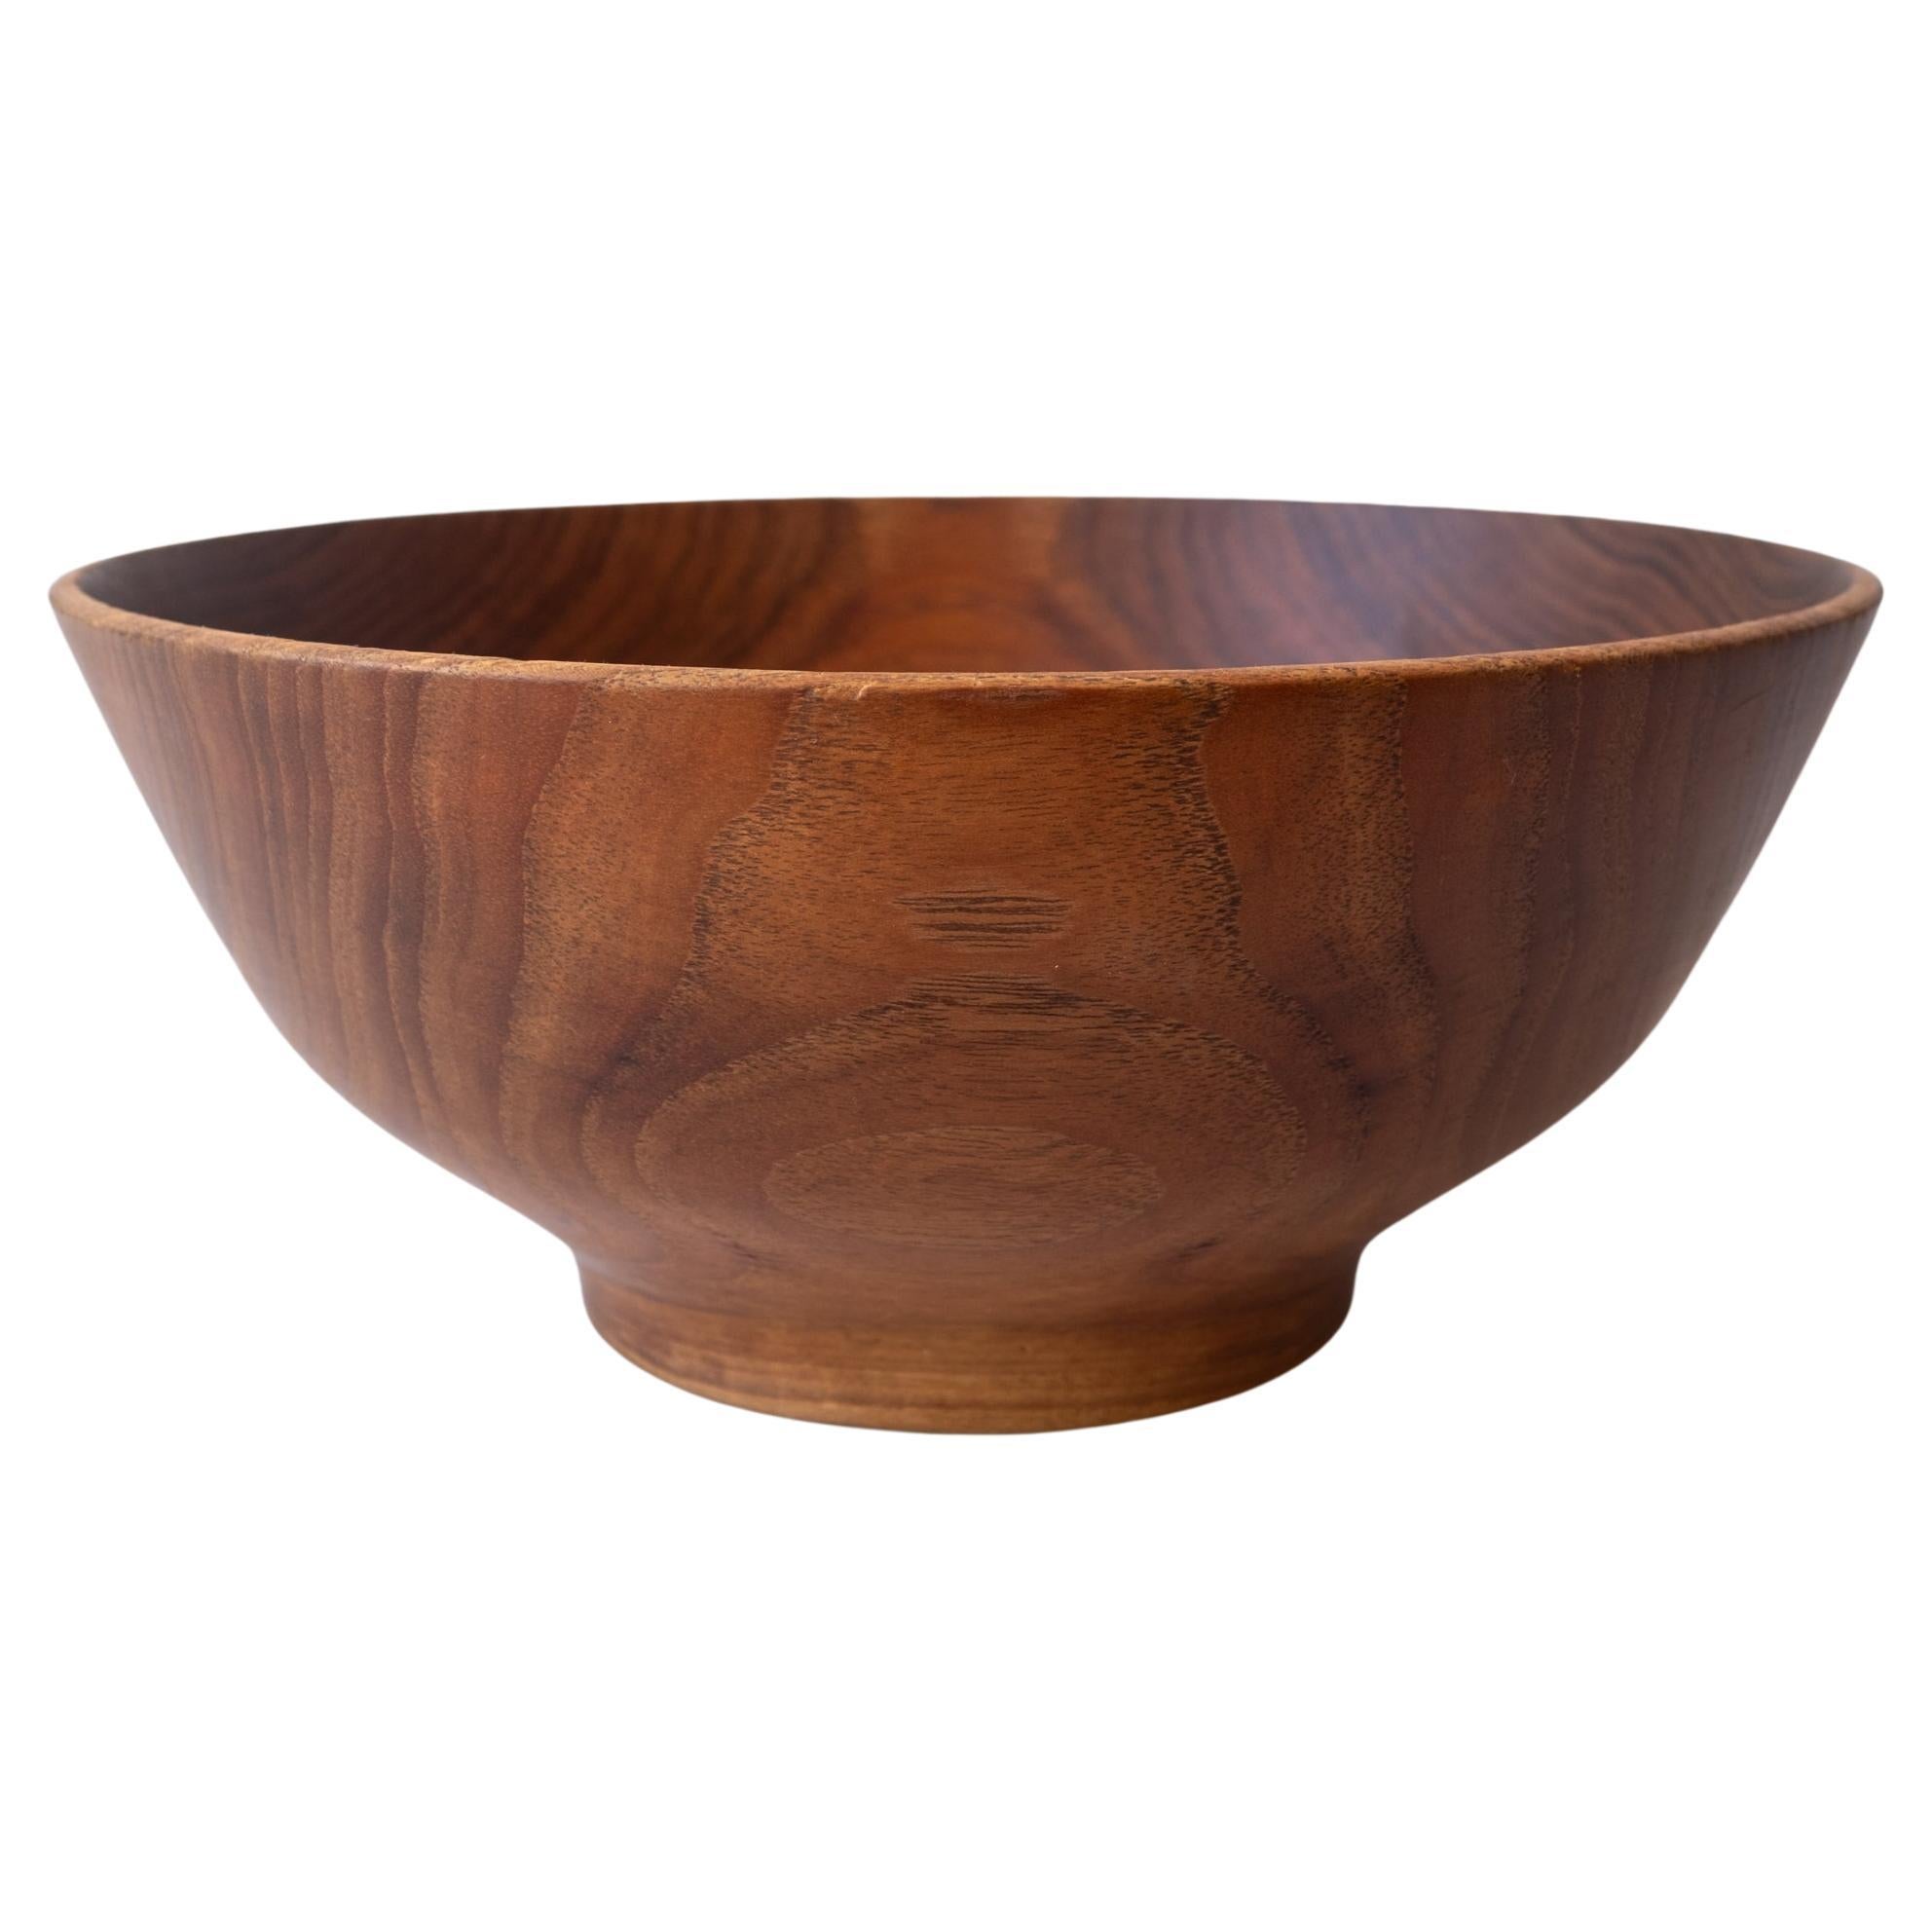 Studio Turned Teak Footed Bowl by Bob Stocksdale For Sale